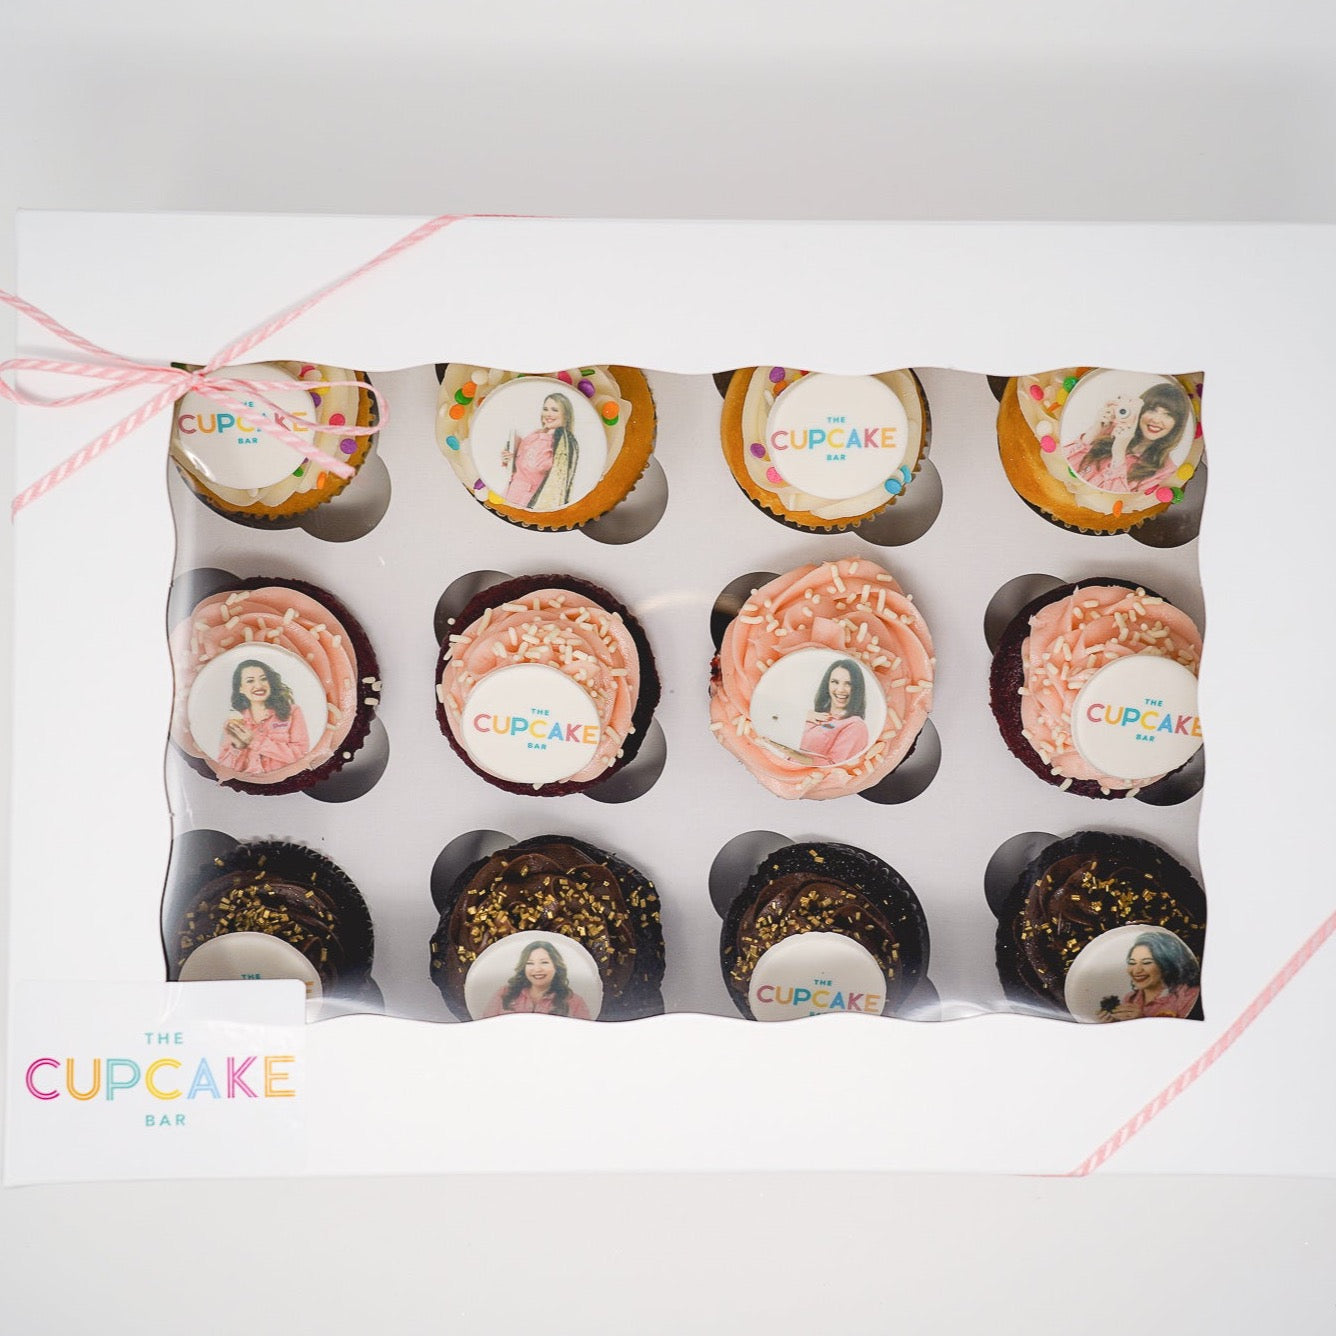 Pack of 12 cupcakes with Custom fondant cupcake toppers, available for pickup and delivery in Austin, Texas.